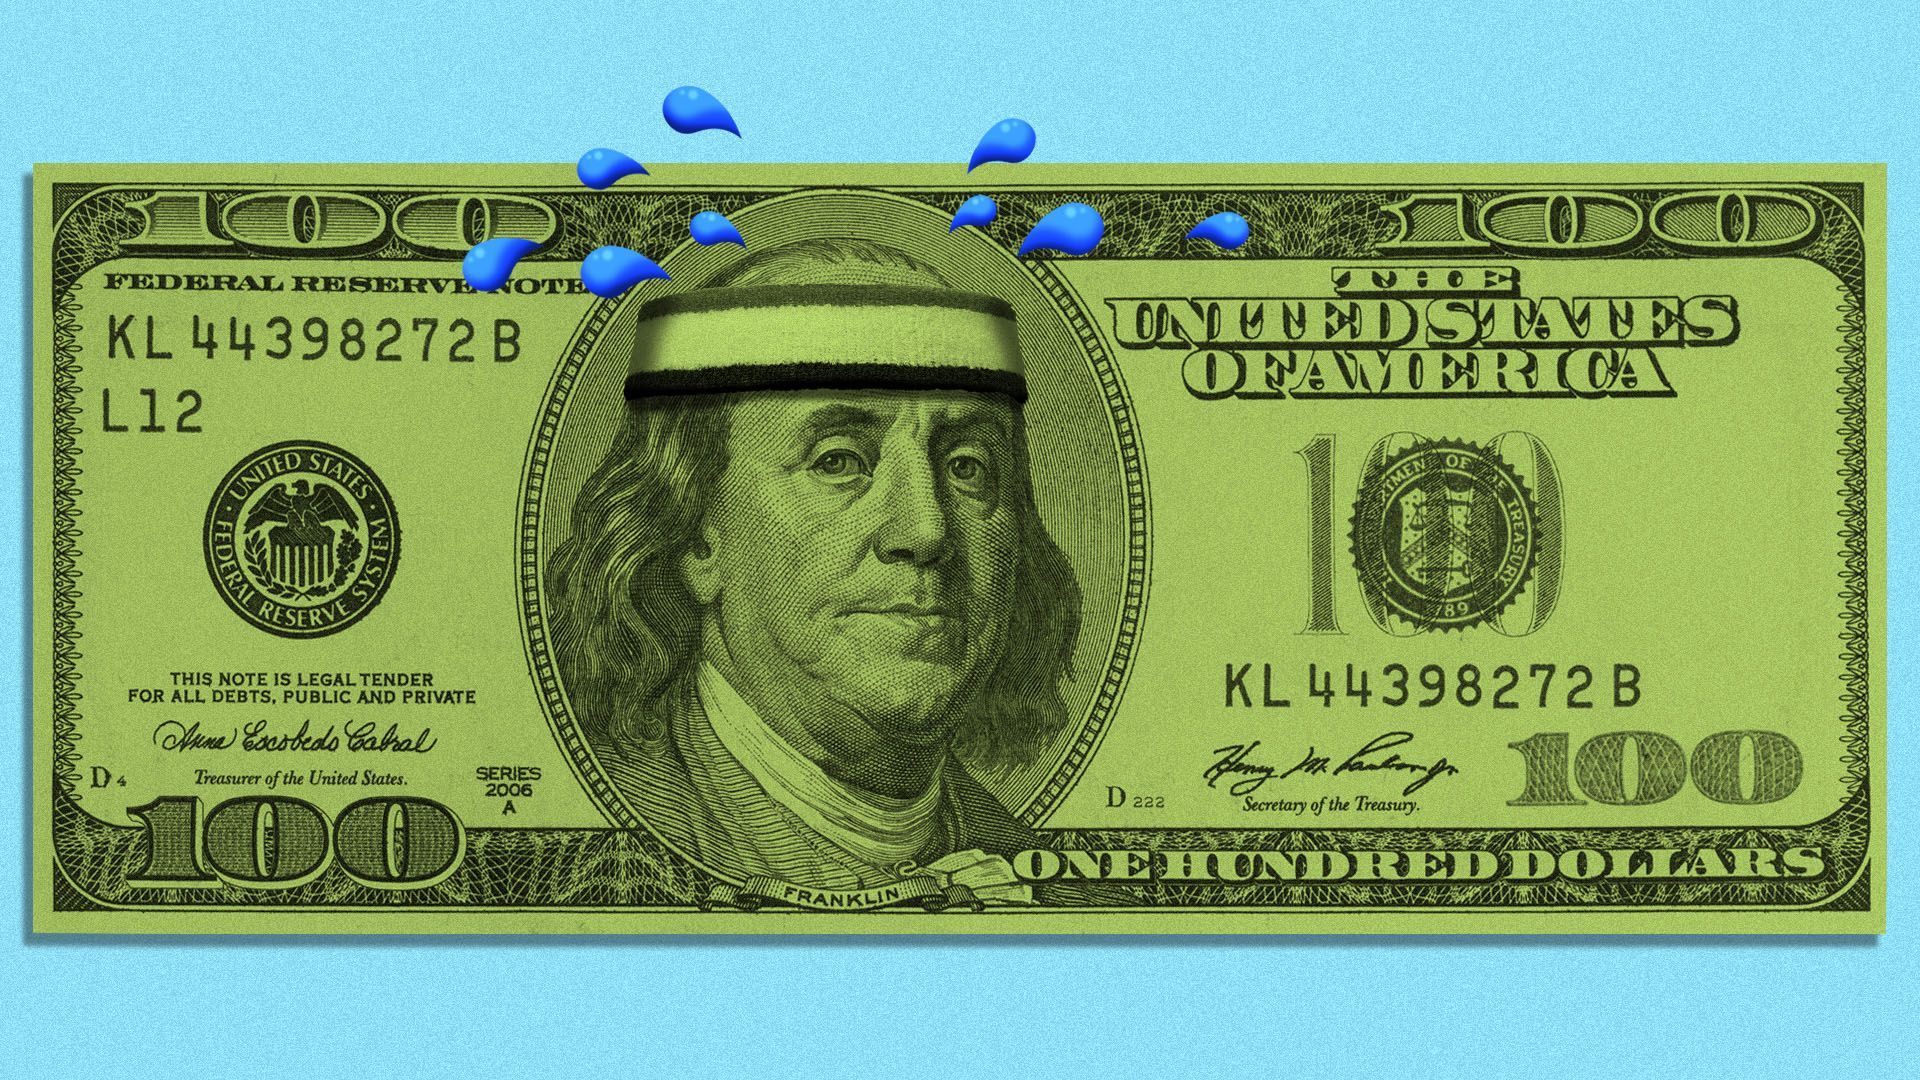 Illustration of a hundred dollar bill with Franklin sweating in wearing a sweatband 